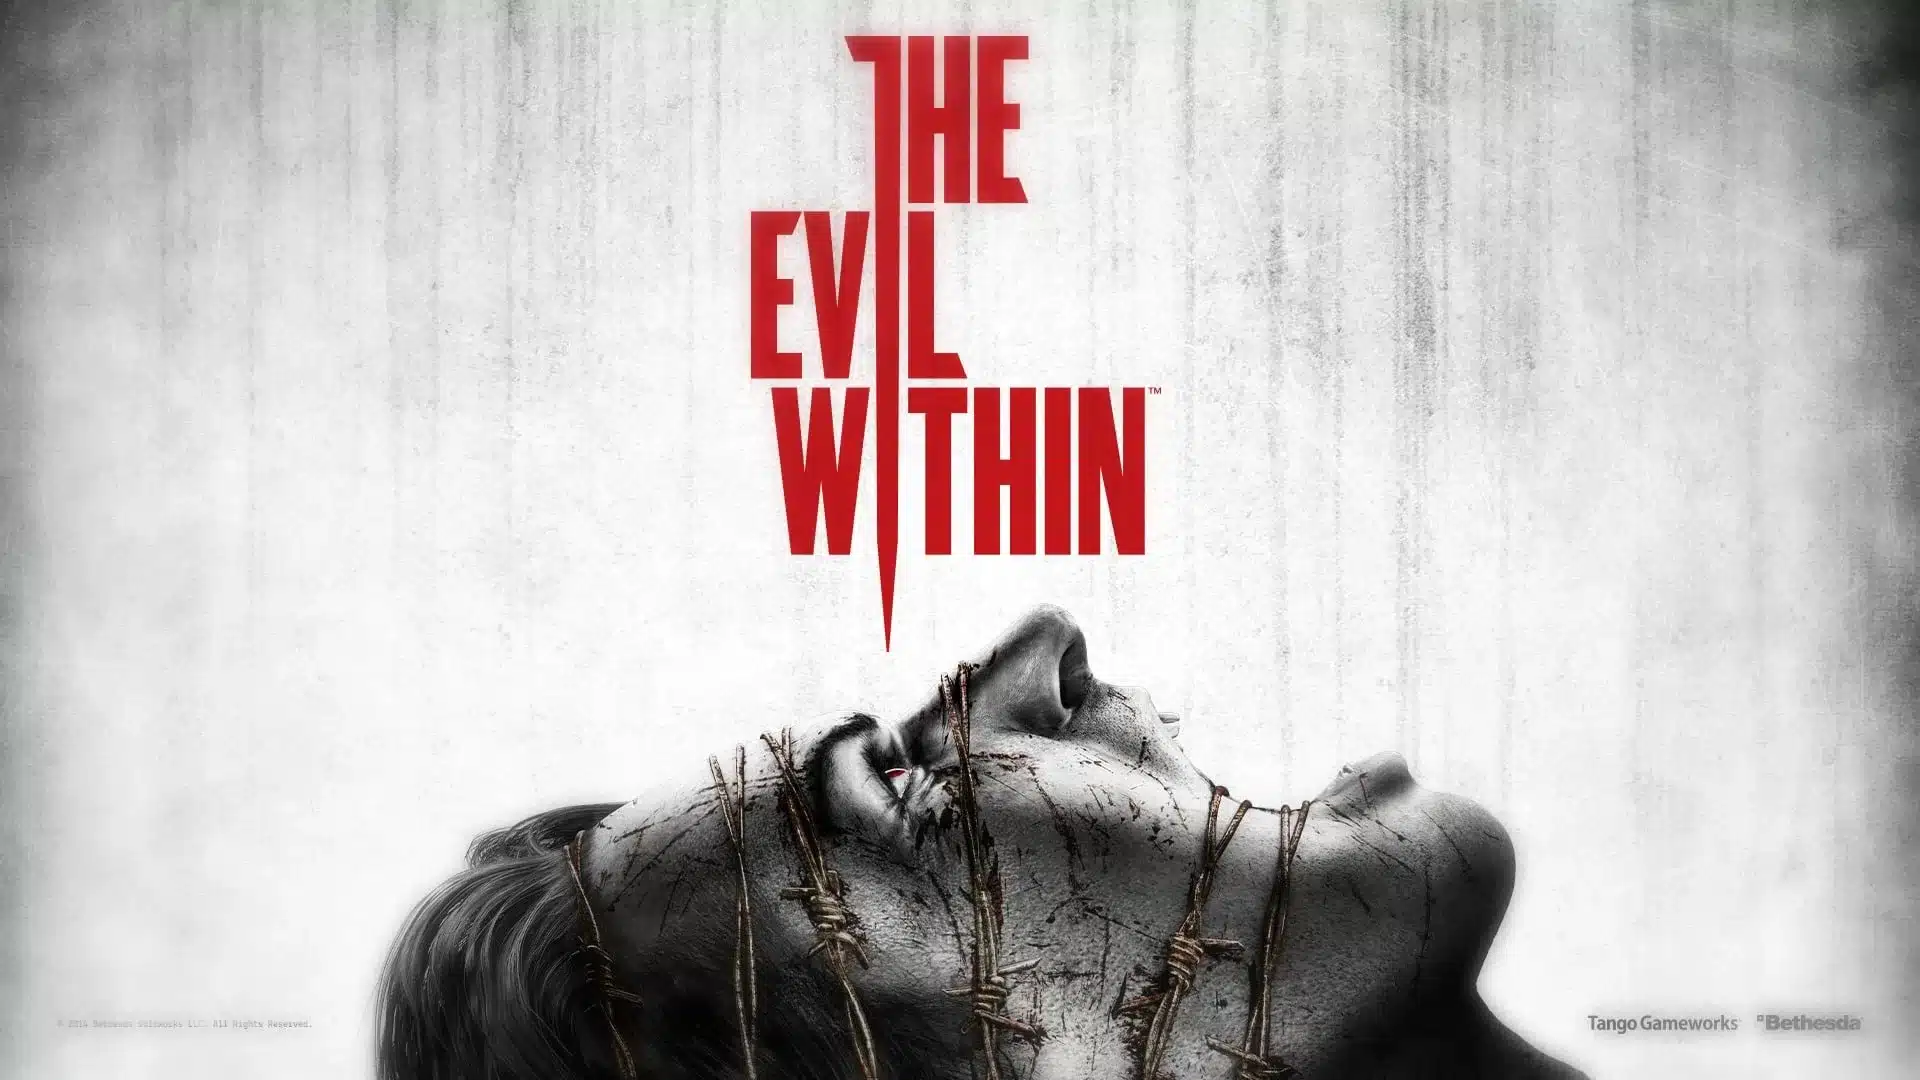 The Devil Within – When Love Conquers All